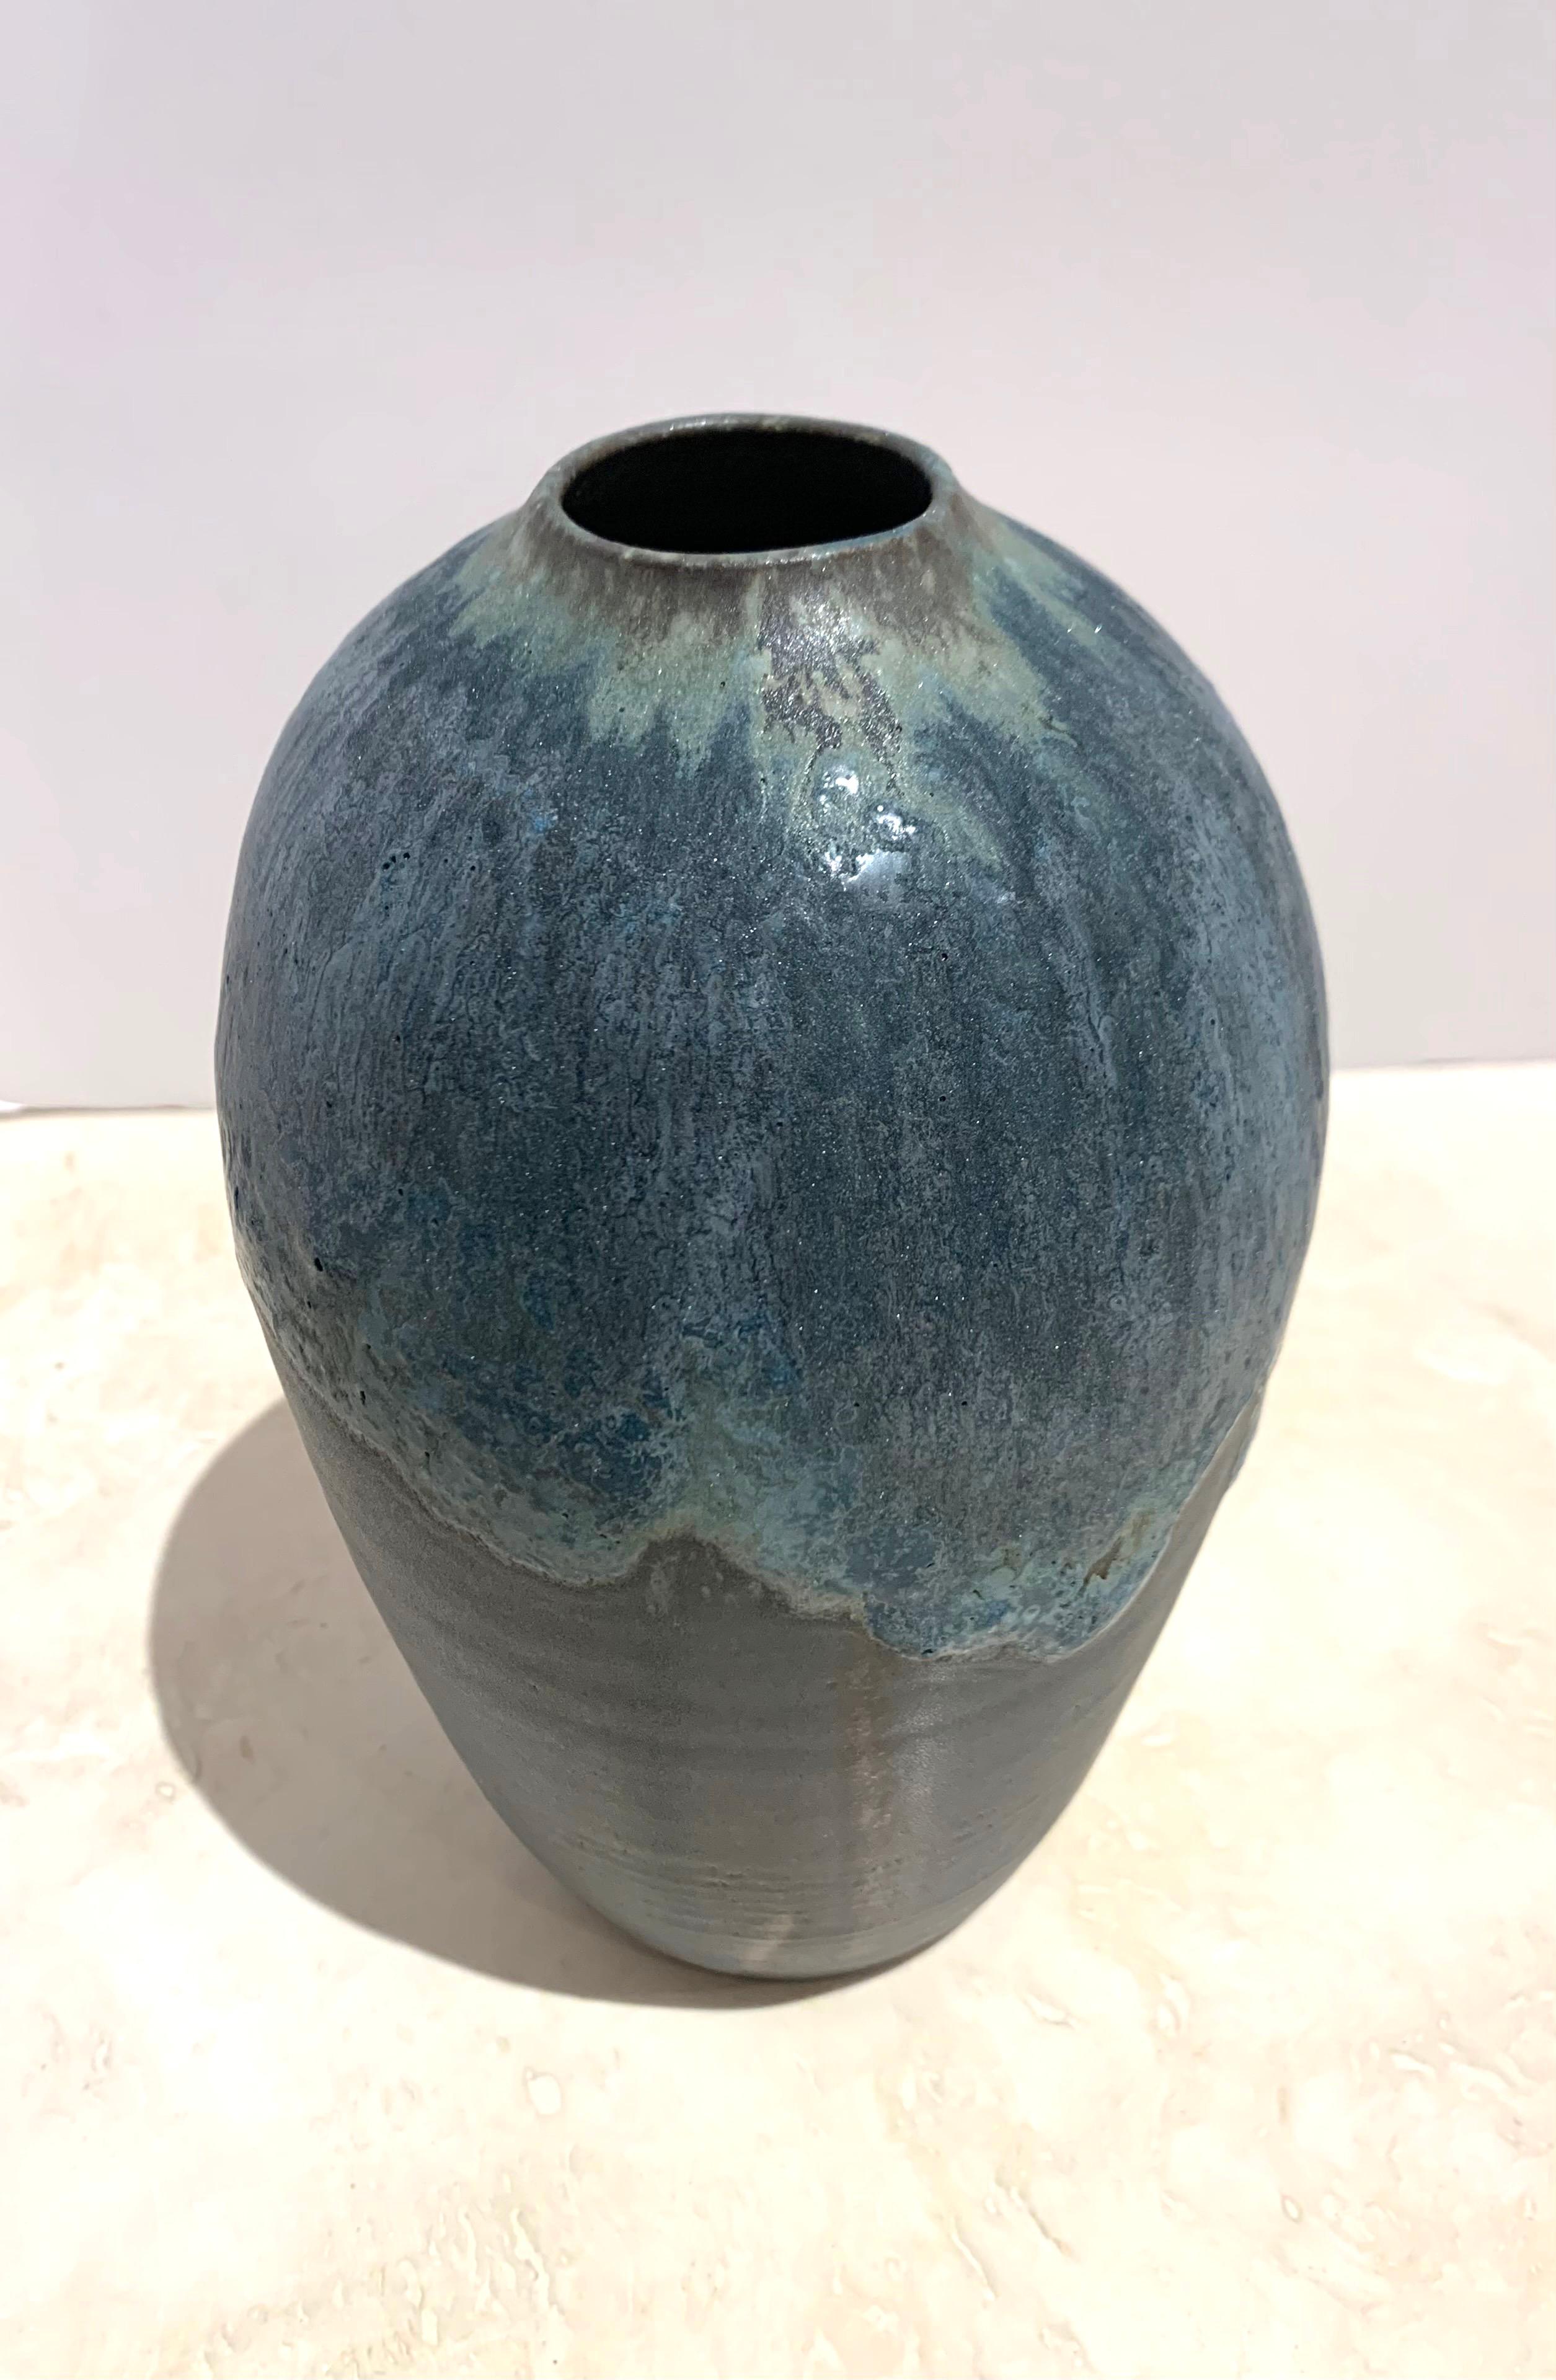 North American Blue and Charcoal Stoneware Vase by Peter Speliopoulos, USA